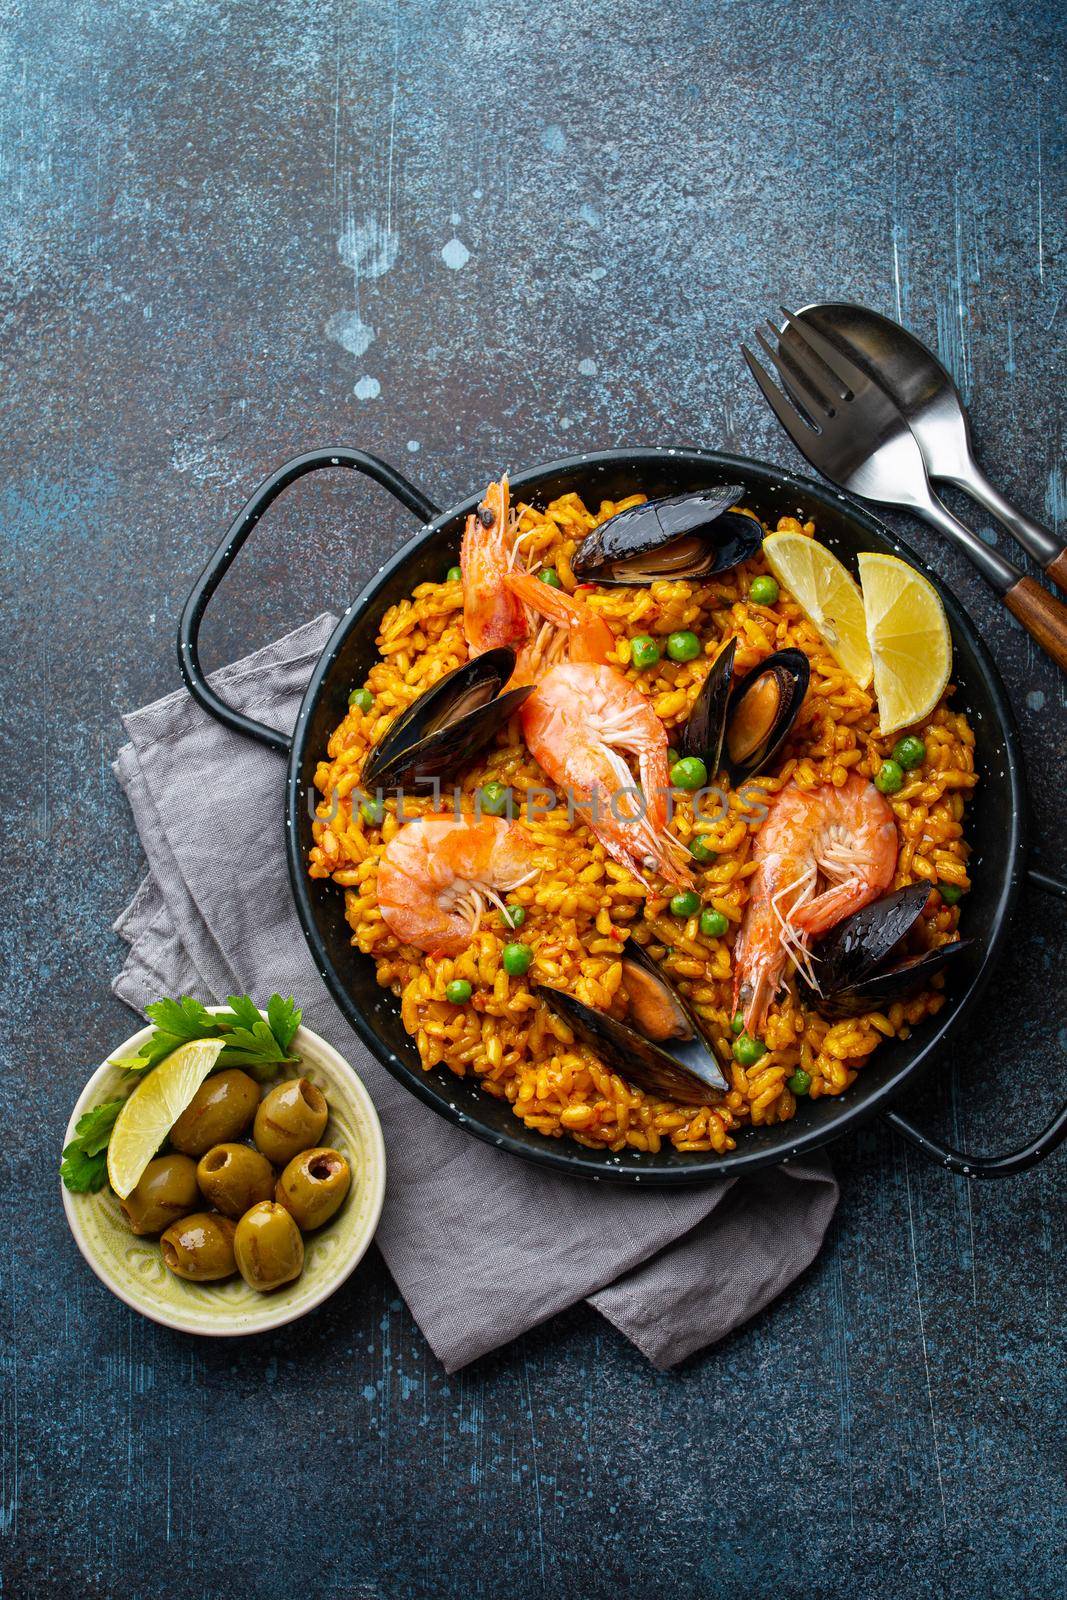 Classic dish of Spain, seafood paella in traditional pan on rustic blue concrete background top view. Spanish paella with shrimps, clamps, mussels, green peas and fresh lemon wedges from above .